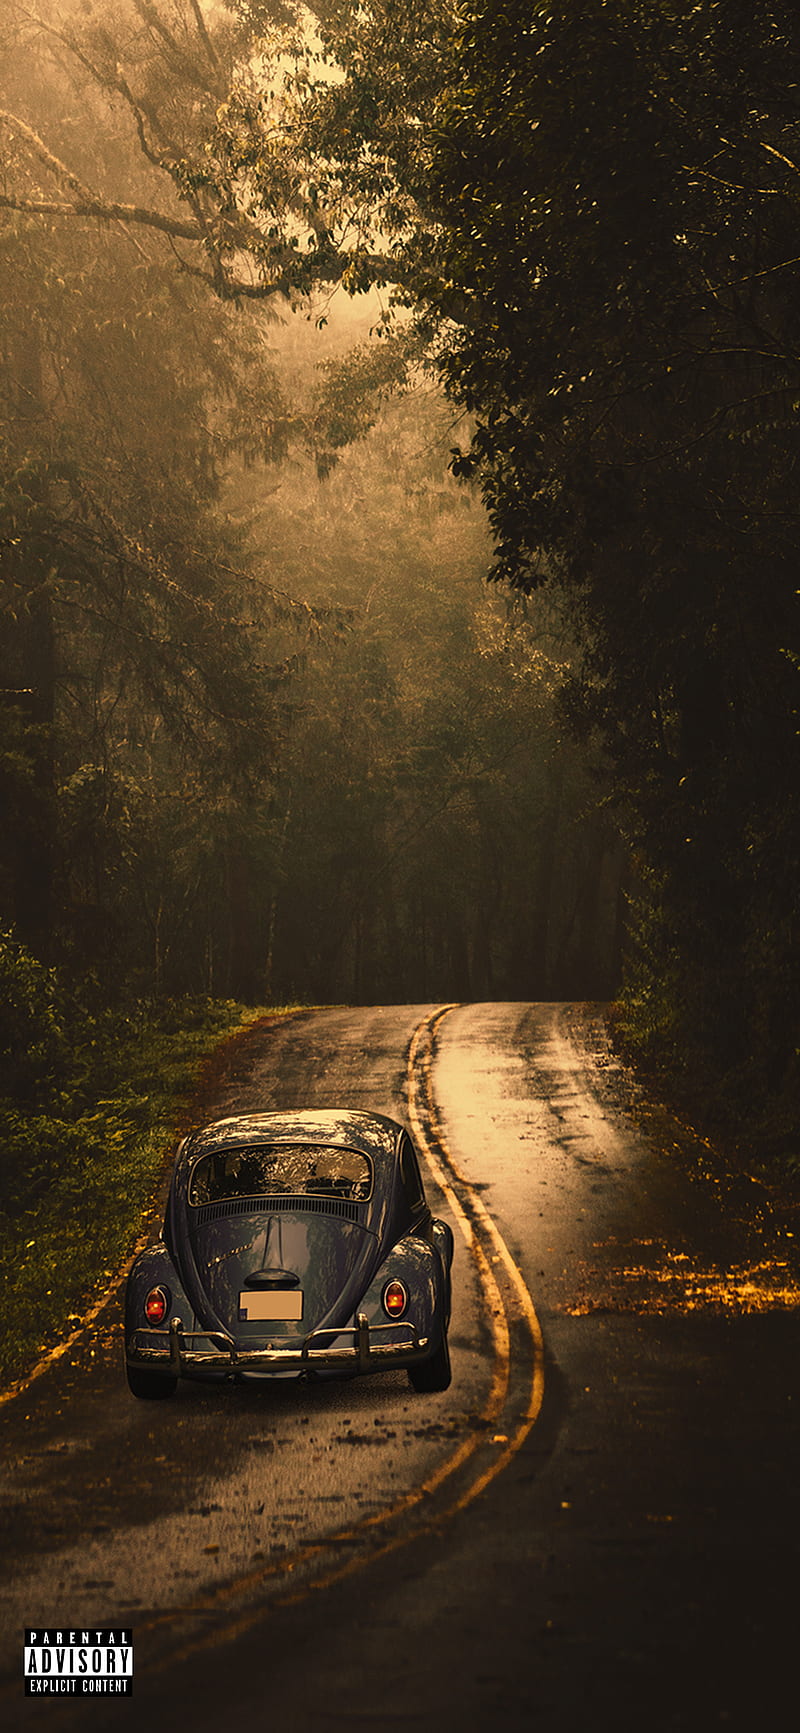 Car on road, alone, carros, gold, lonely, old, sad, sepia, skyline, HD  phone wallpaper | Peakpx